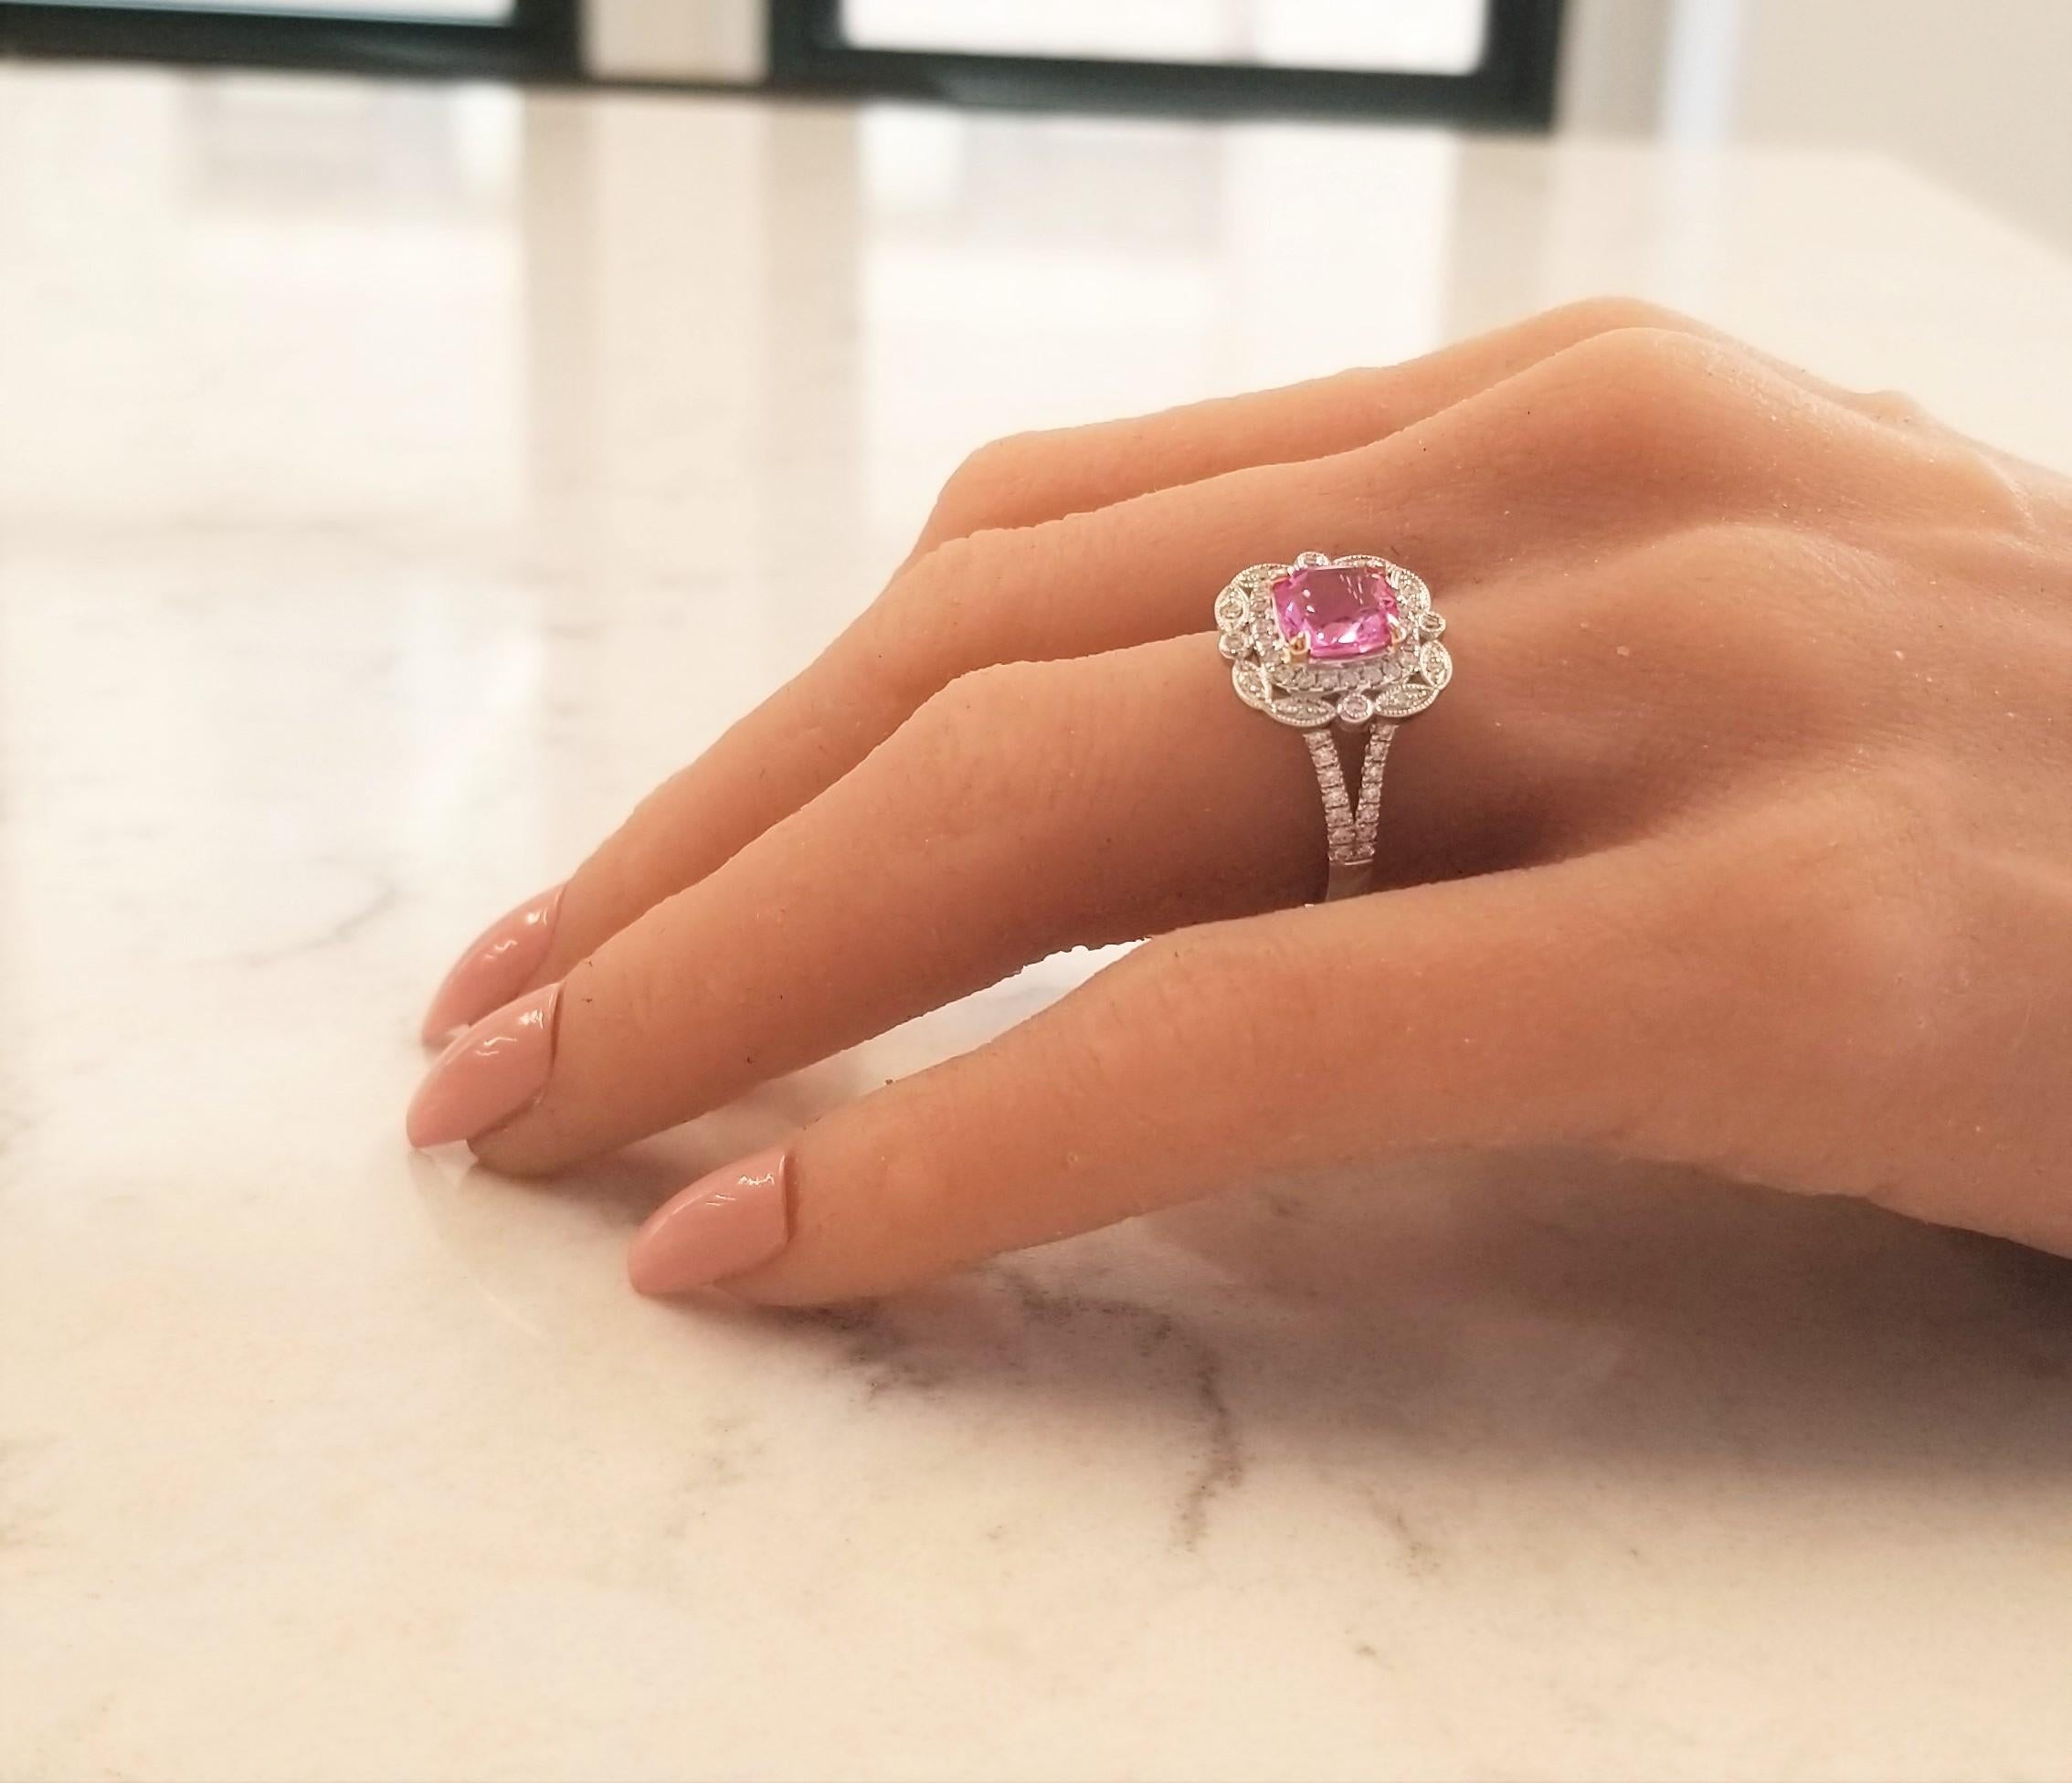 This lovely ring features a 2.14 carat cushion cut pink sapphire. This gem source is Sri Lanka. It measures 7.45 x 7.00 mm; its transparency and clarity is excellent. It is vibrant pink, bubble gum pink; it is framed with a complex border of 0.45